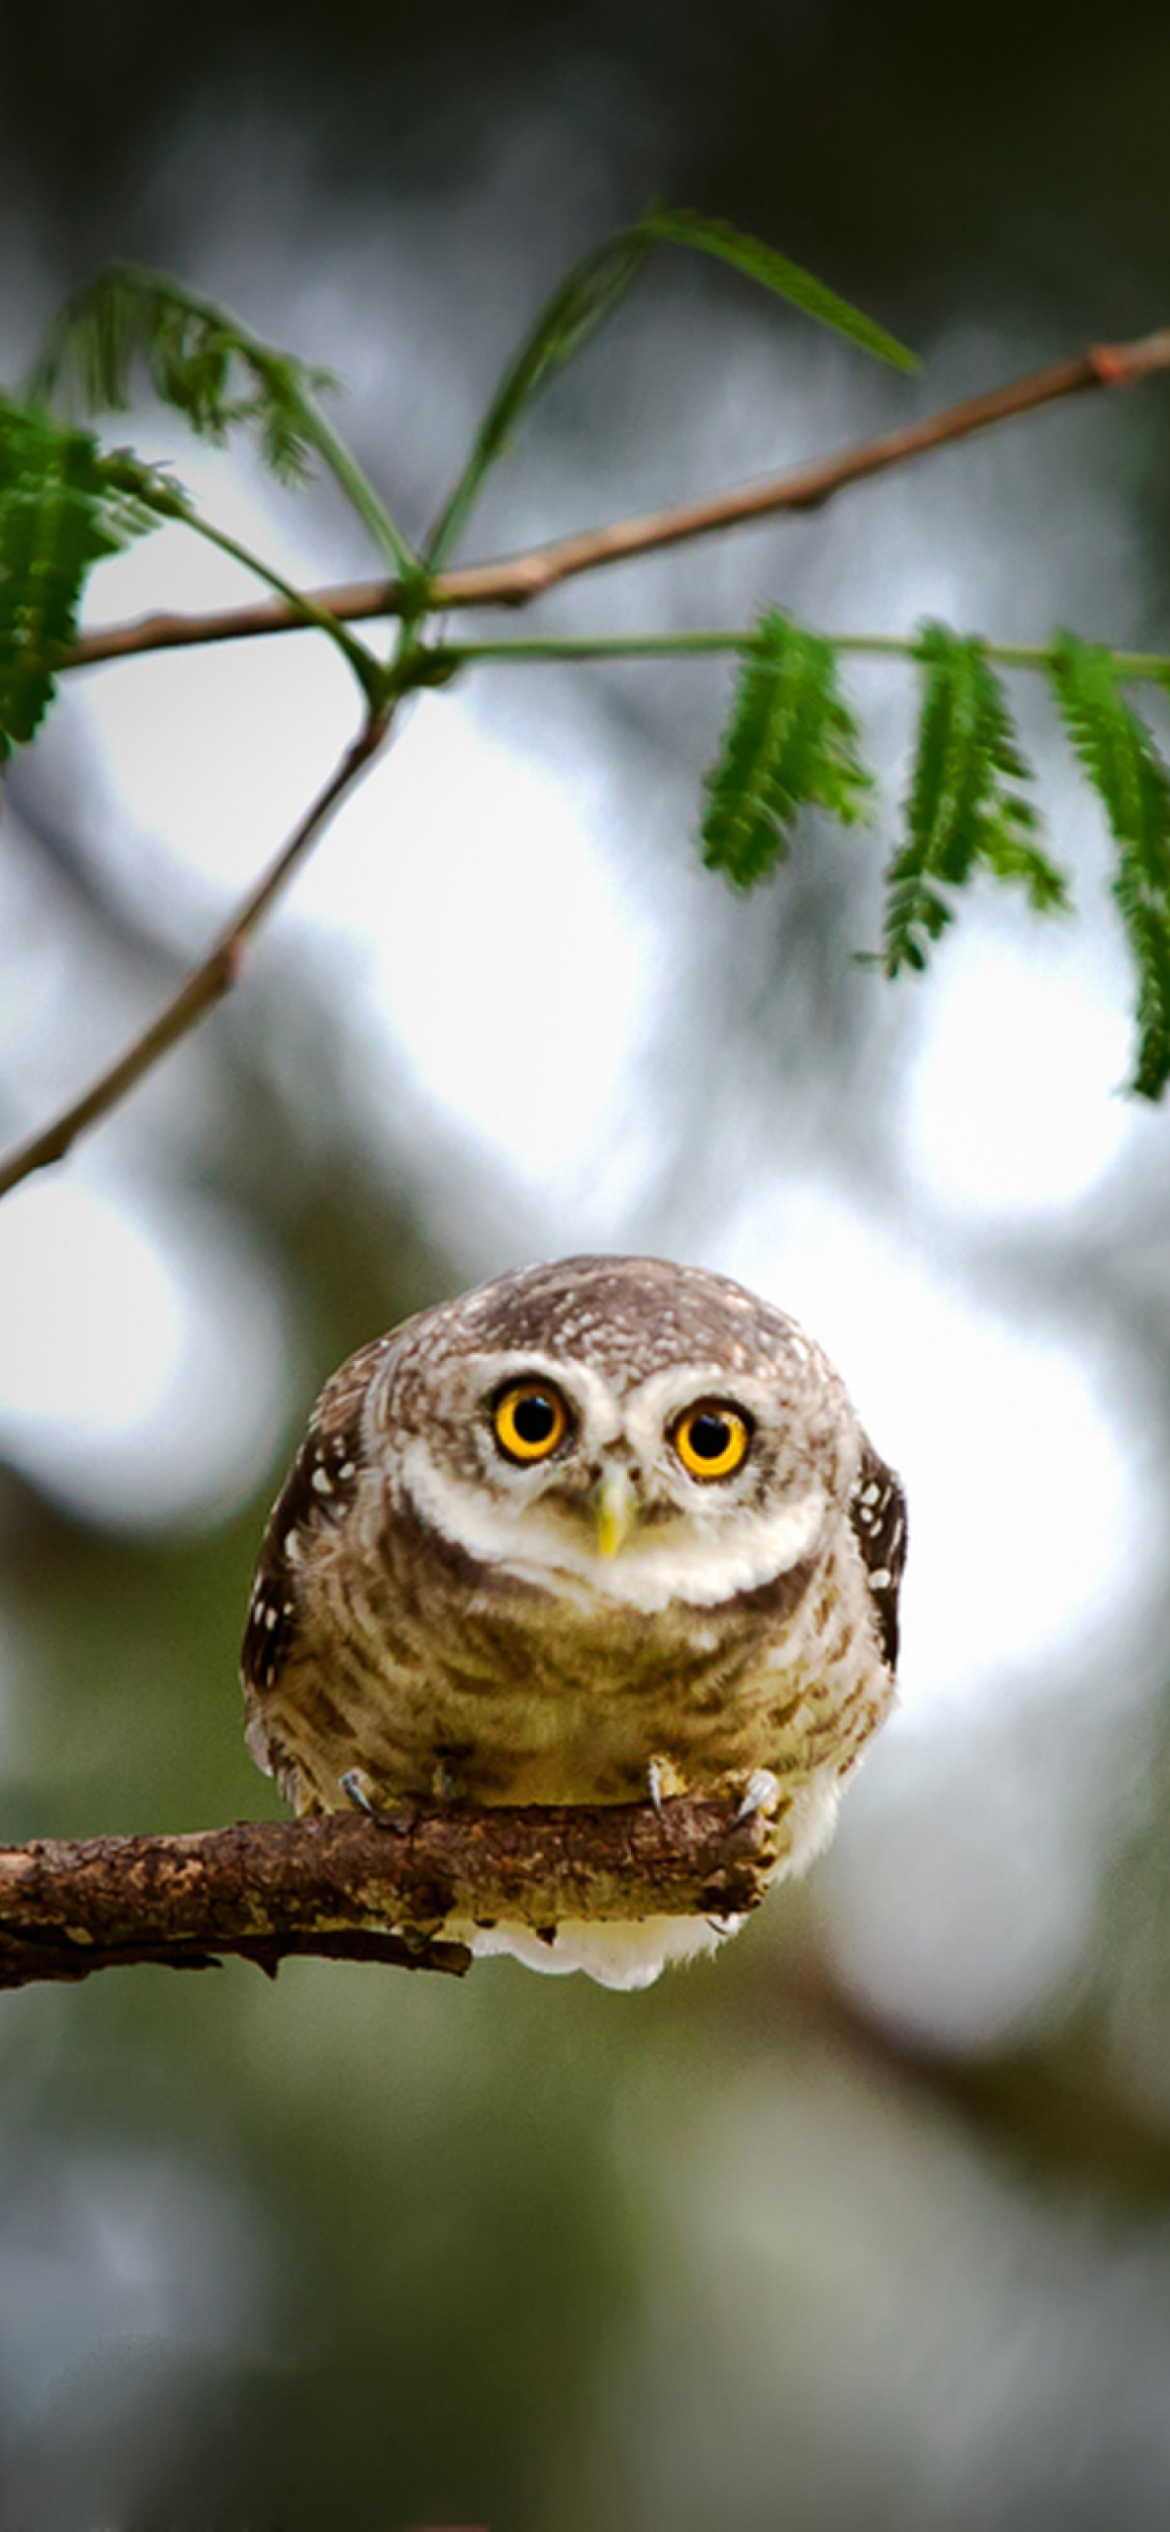 Das Cute And Funny Little Owl With Big Eyes Wallpaper 1170x2532